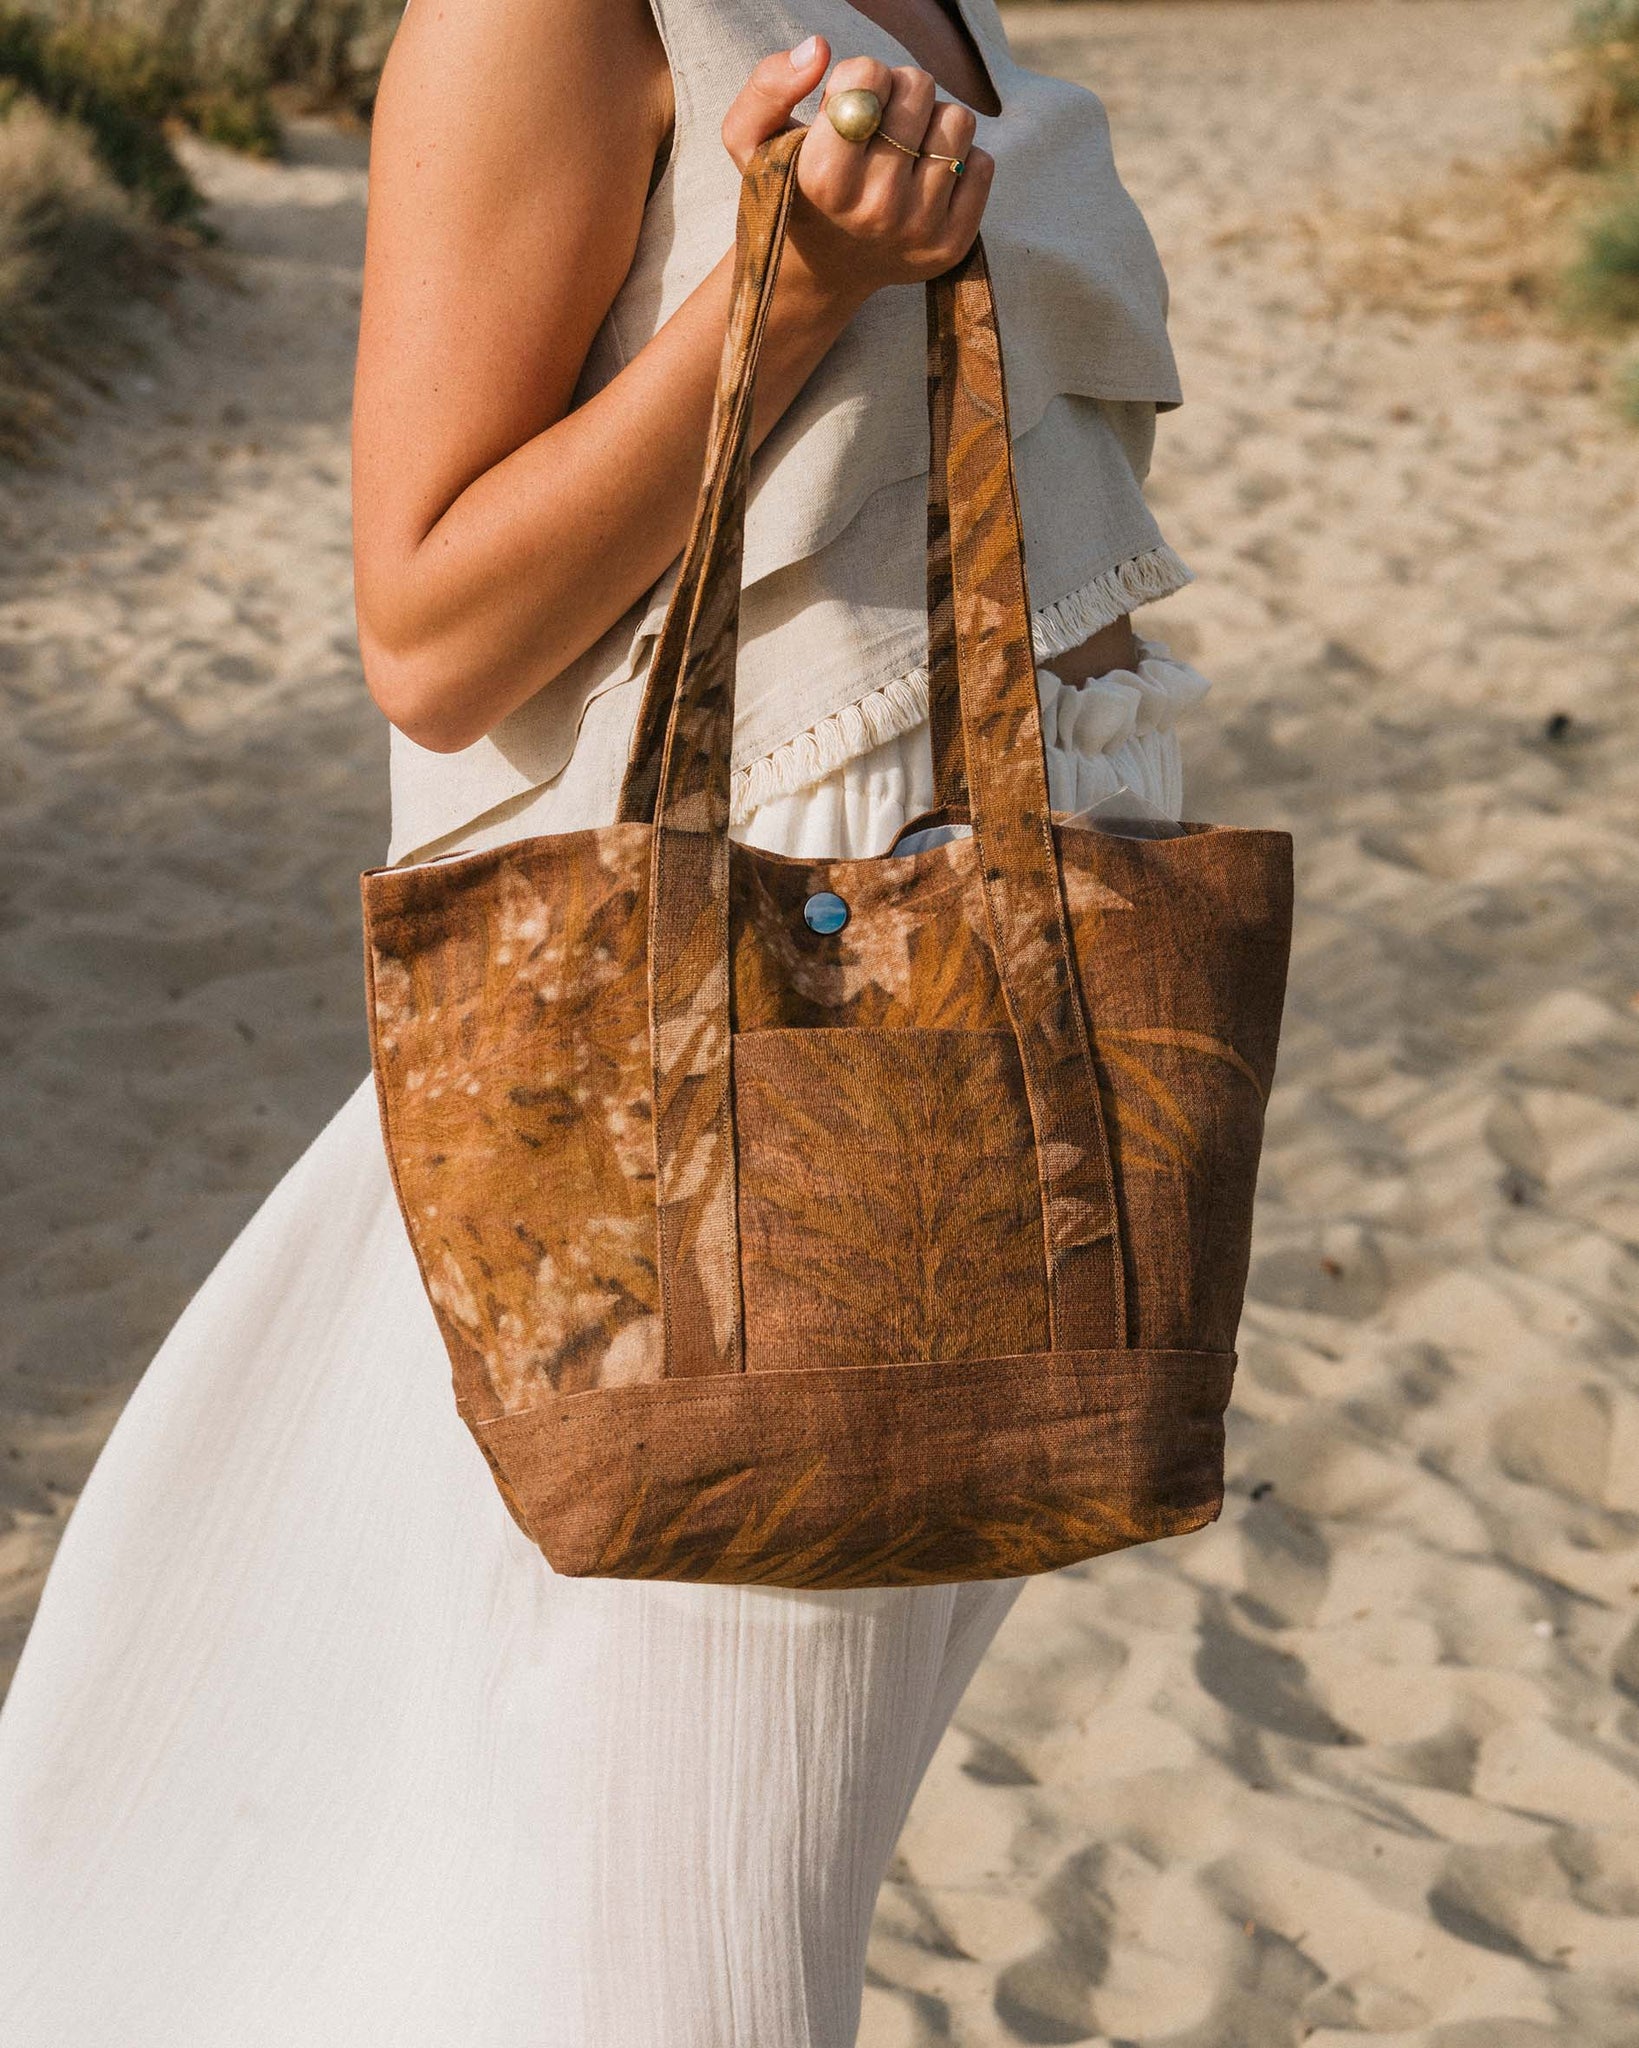 Tote bag made from hemp and naturally dyed using leaves